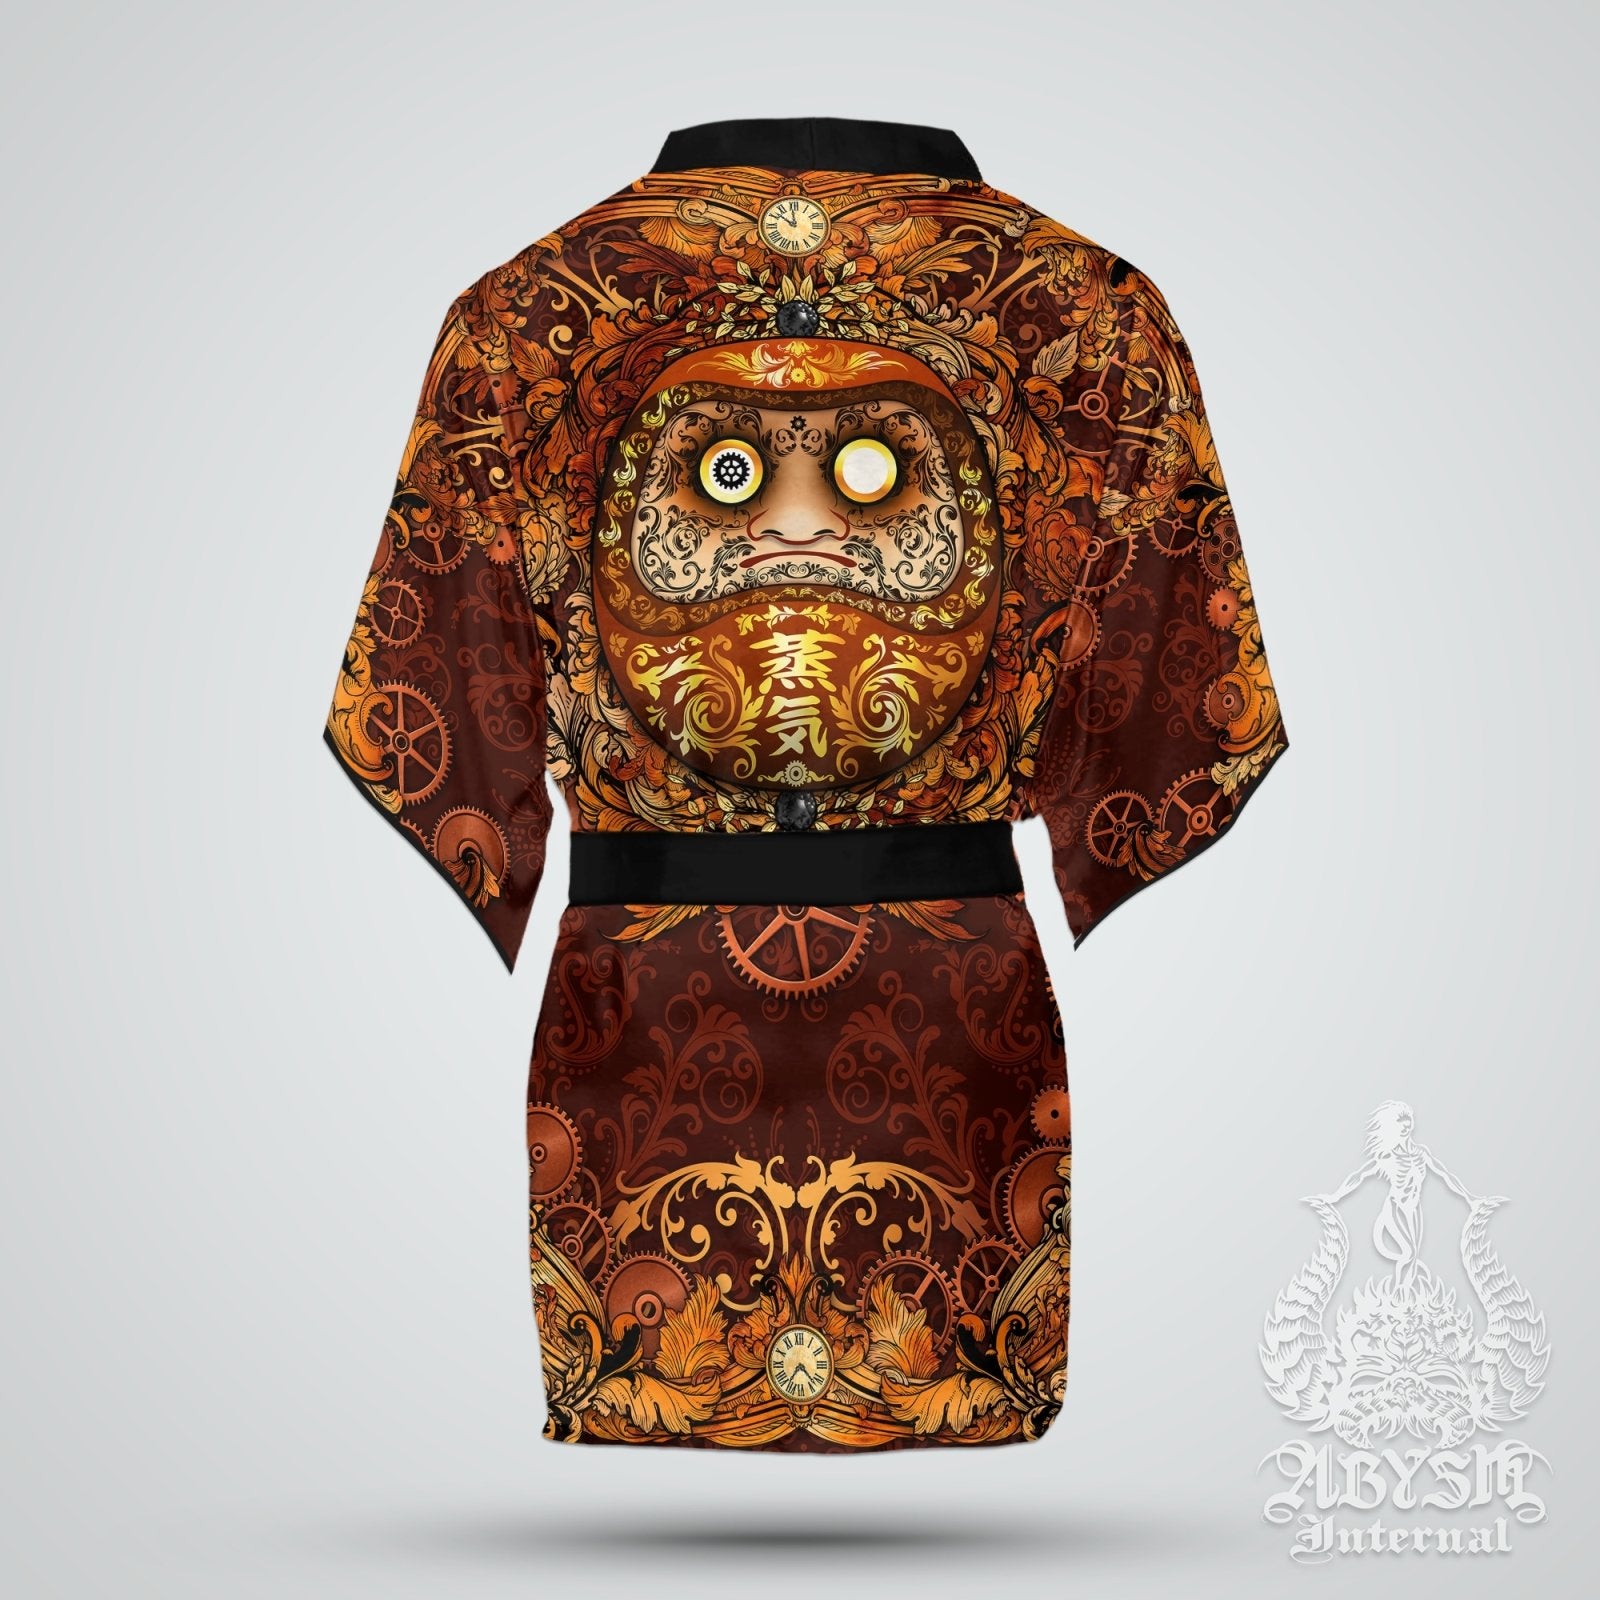 Daruma Cover Up, Beach Outfit, Party Kimono, Japanese Summer Festival Robe, Indie and Alternative Clothing, Unisex - Steampunk - Abysm Internal